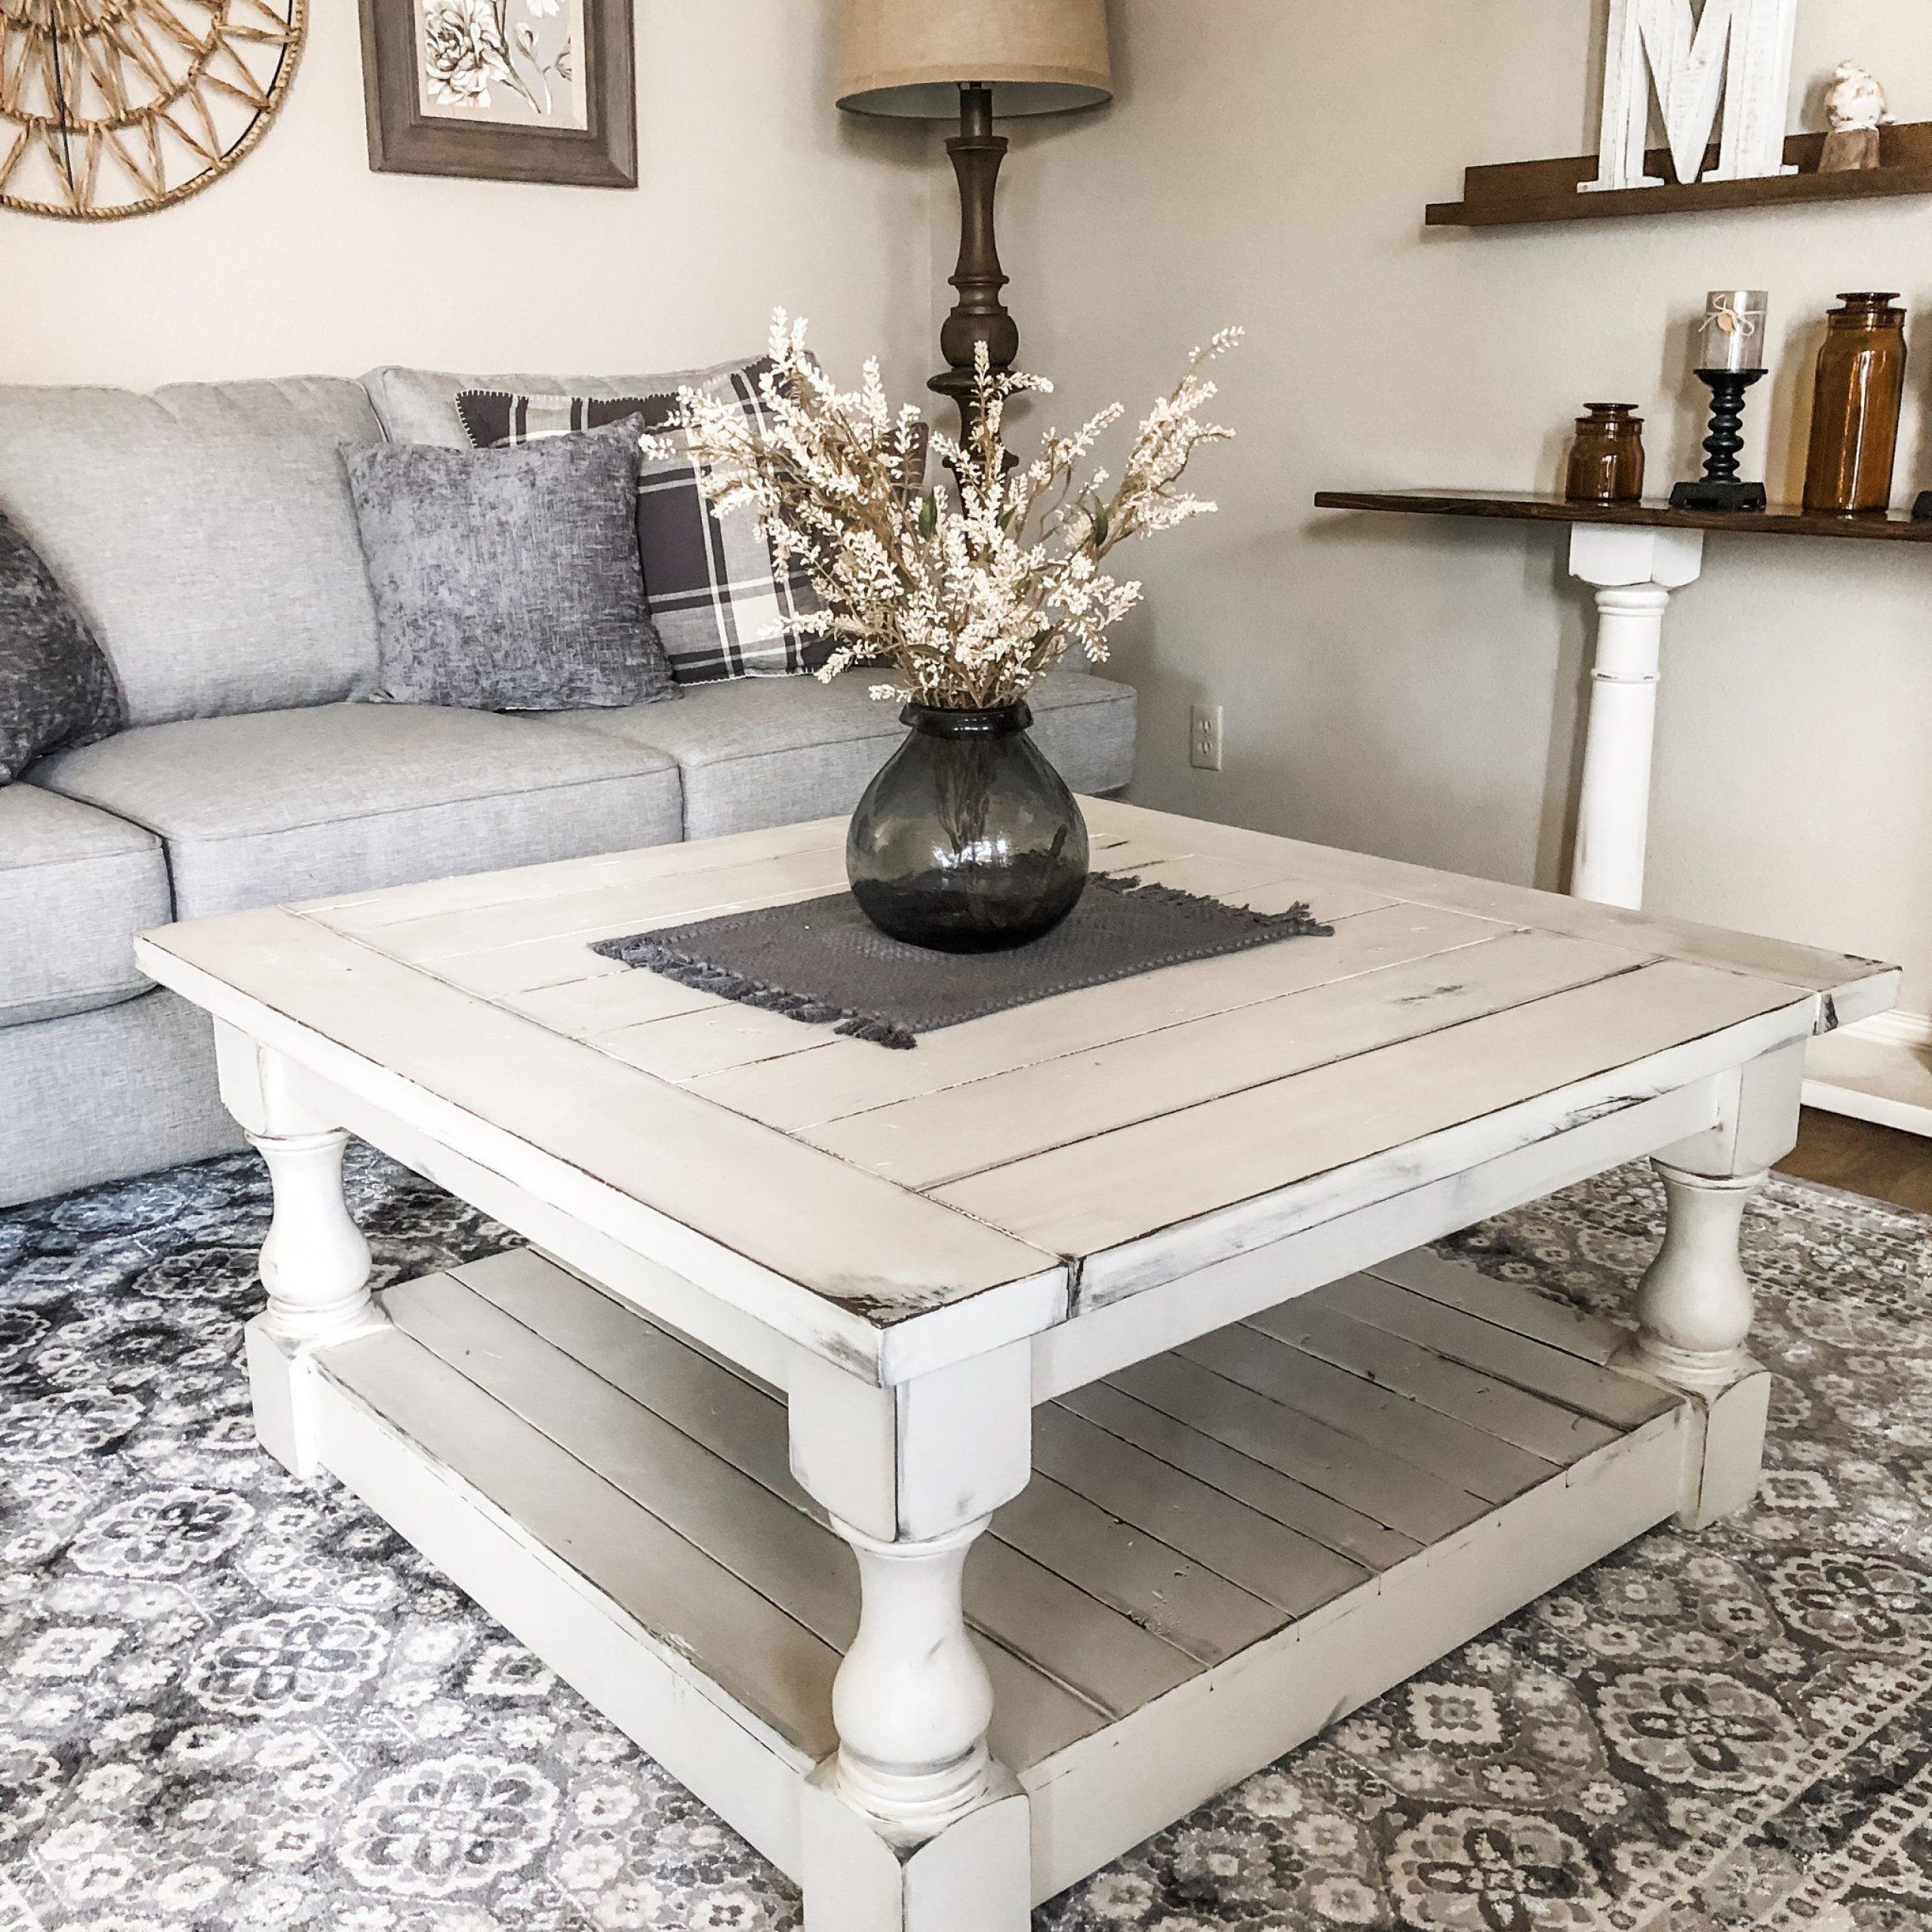 Rustic Baluster Square Farmhouse Coffee Table All Painted & Distressed Throughout Living Room Farmhouse Coffee Tables (View 14 of 20)